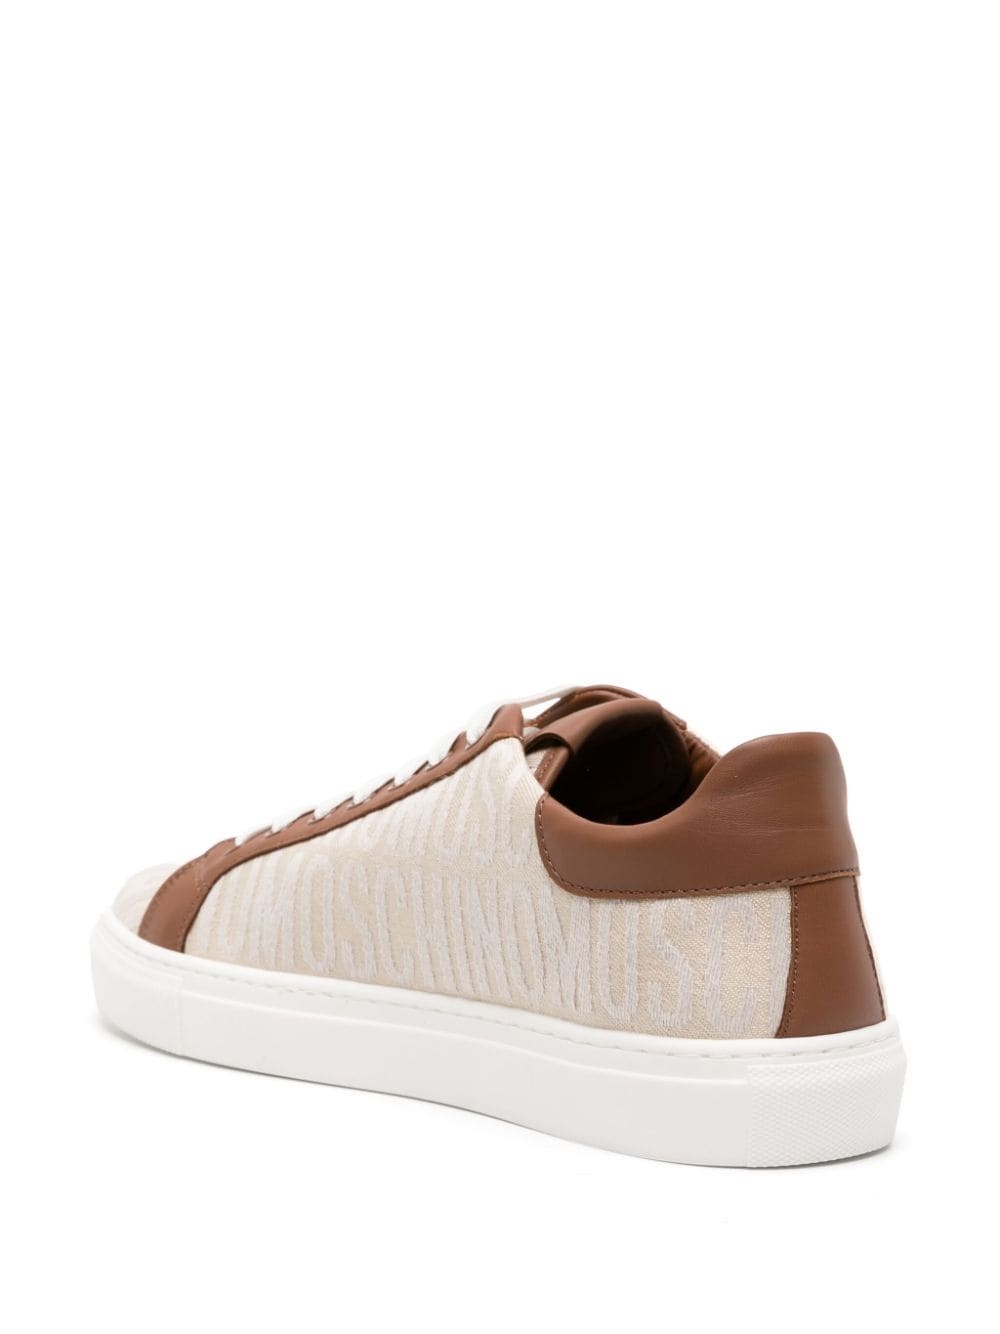 embroidered-logo panelled-leather sneakers - 3